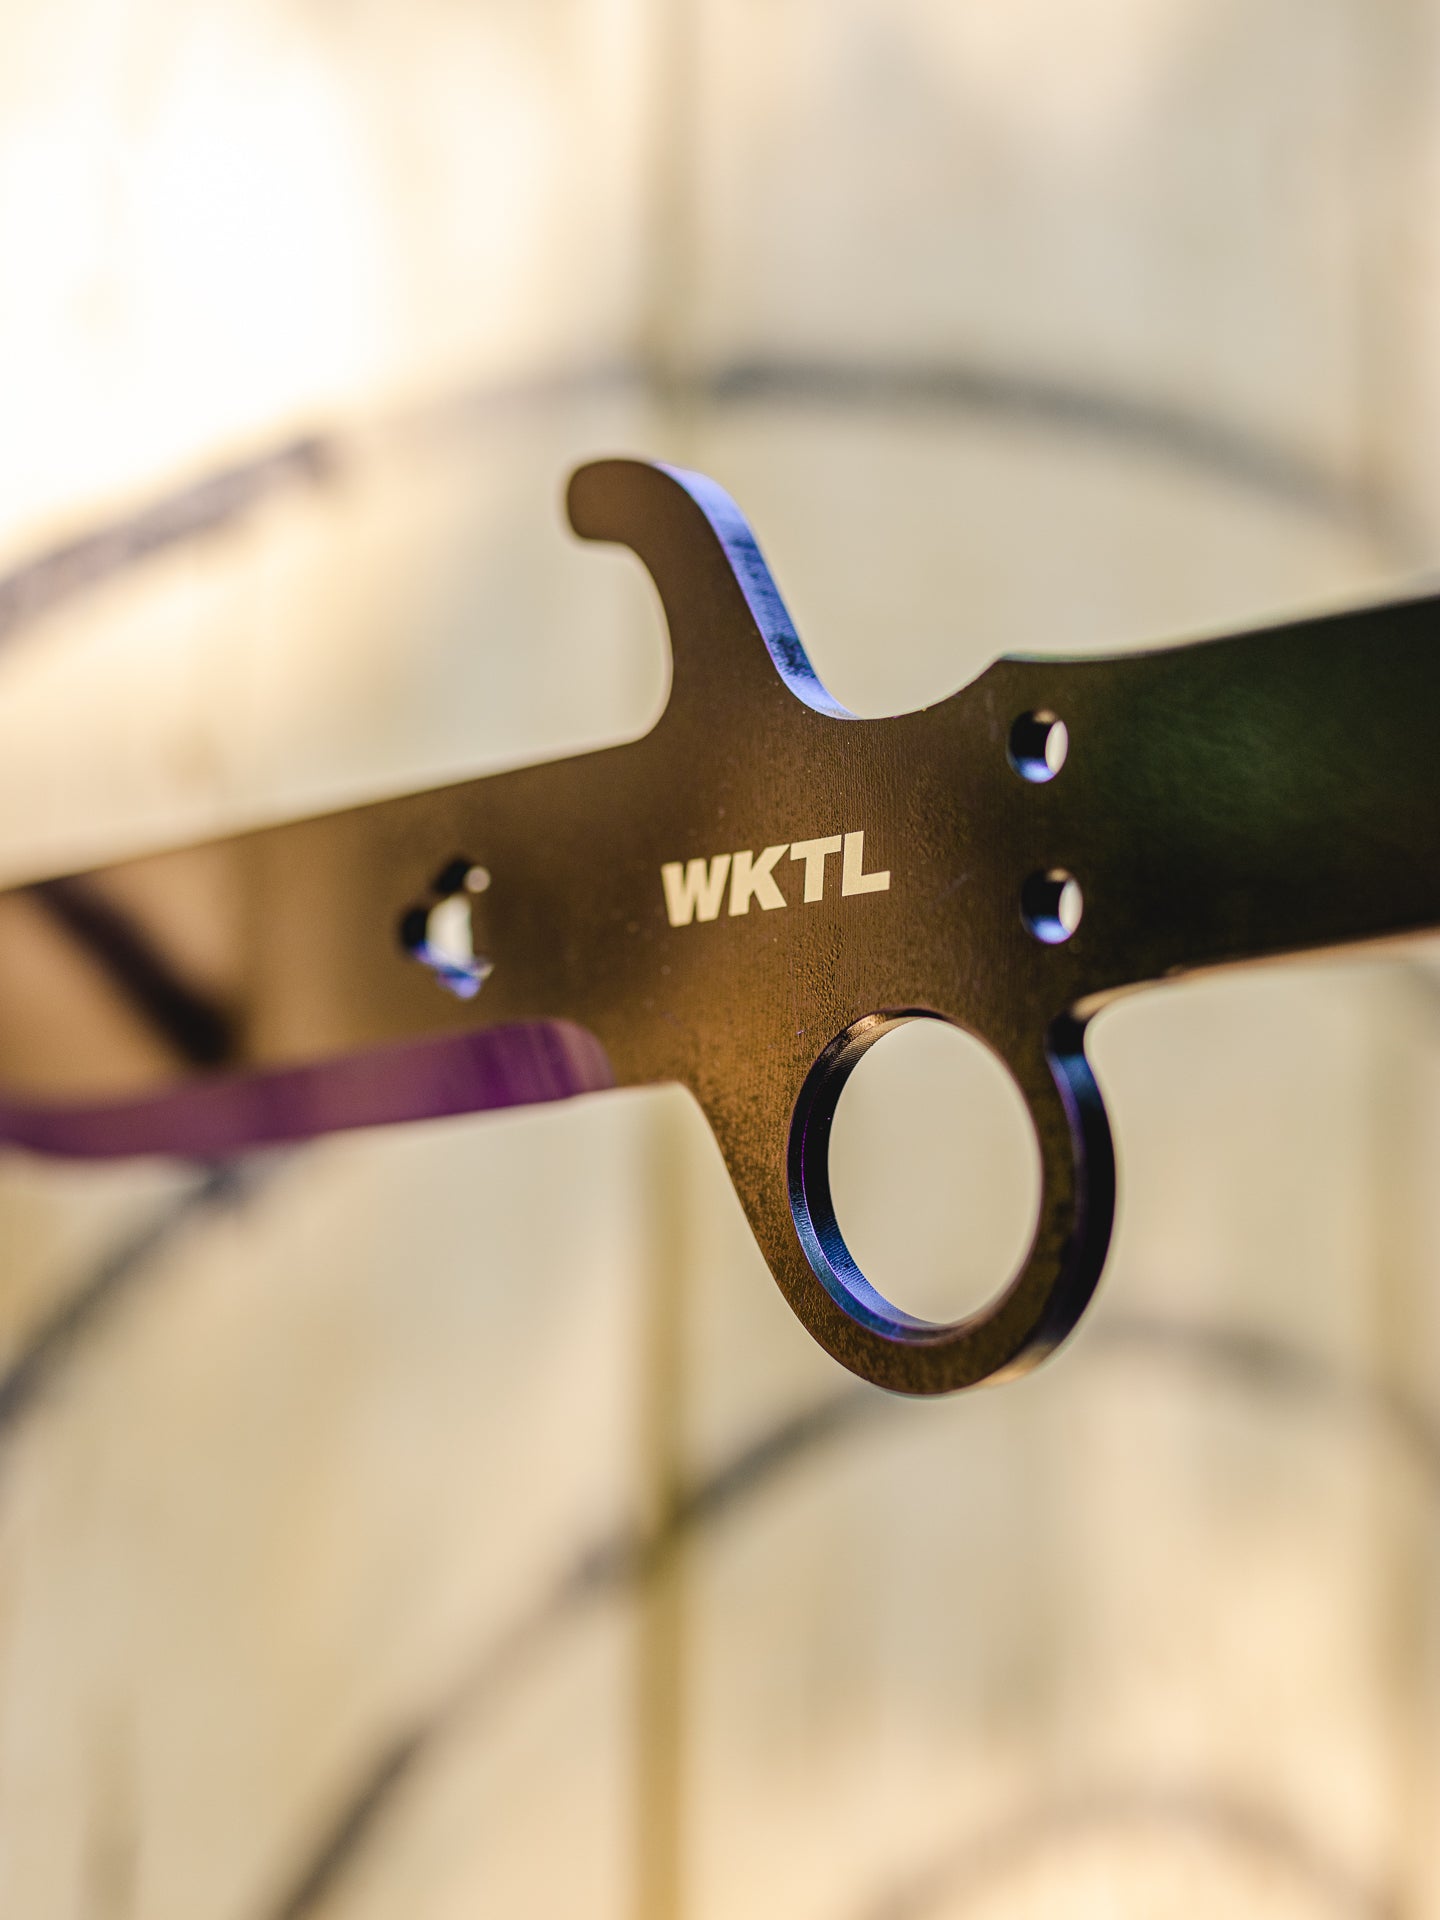 World Knife Throwing League (WKTL) Certified Toro Competition Throwing Knife, The Bandito Guard